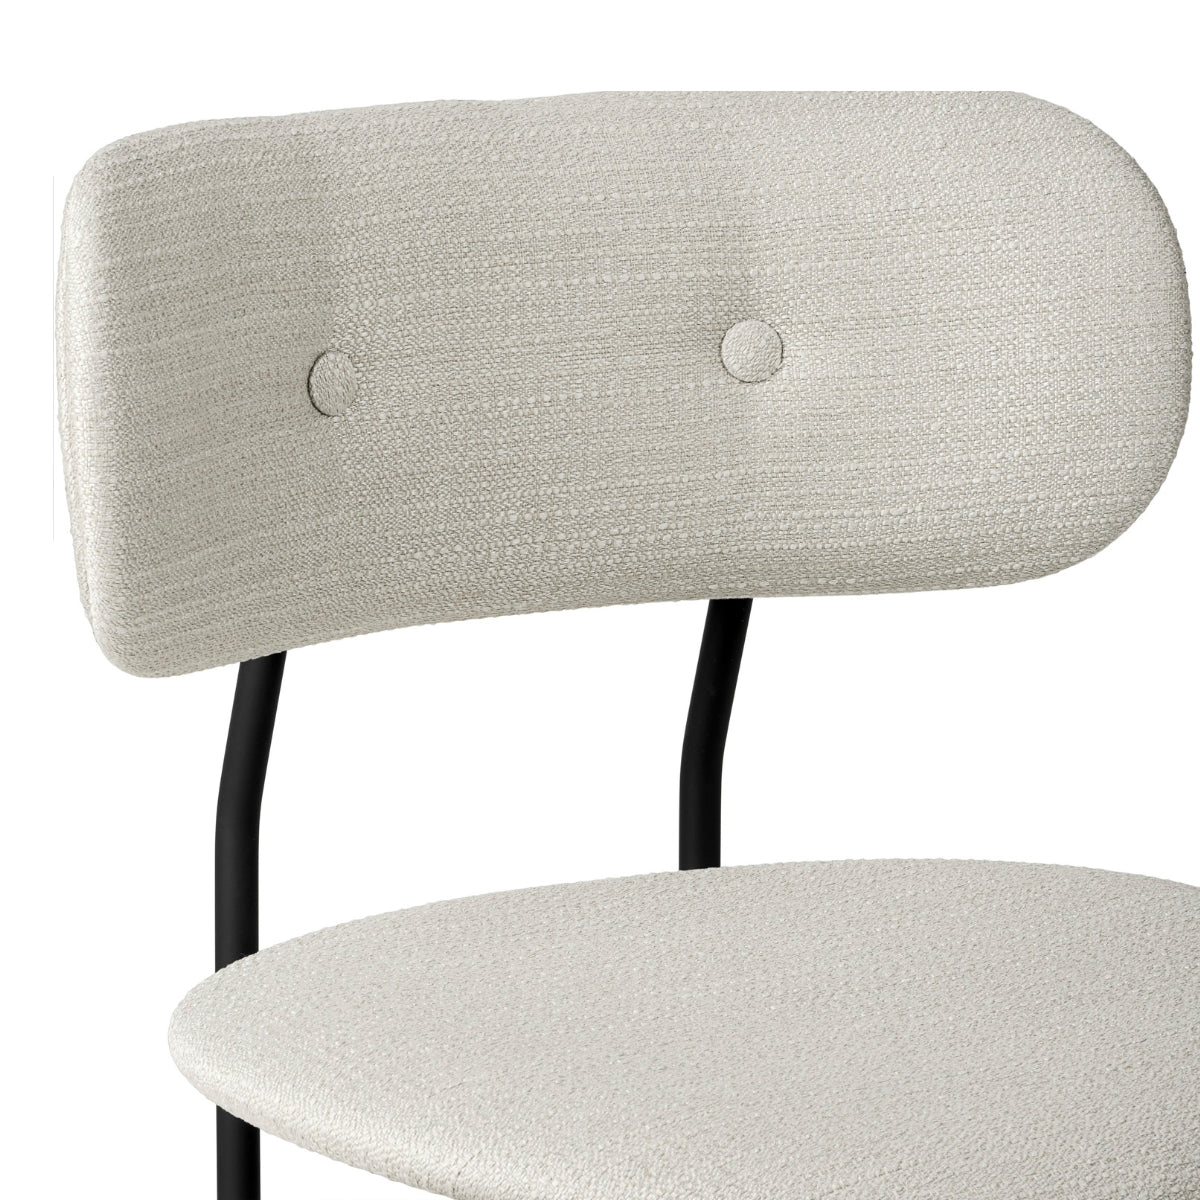 GUBI | Coco Dining Chair Fully Upholstered